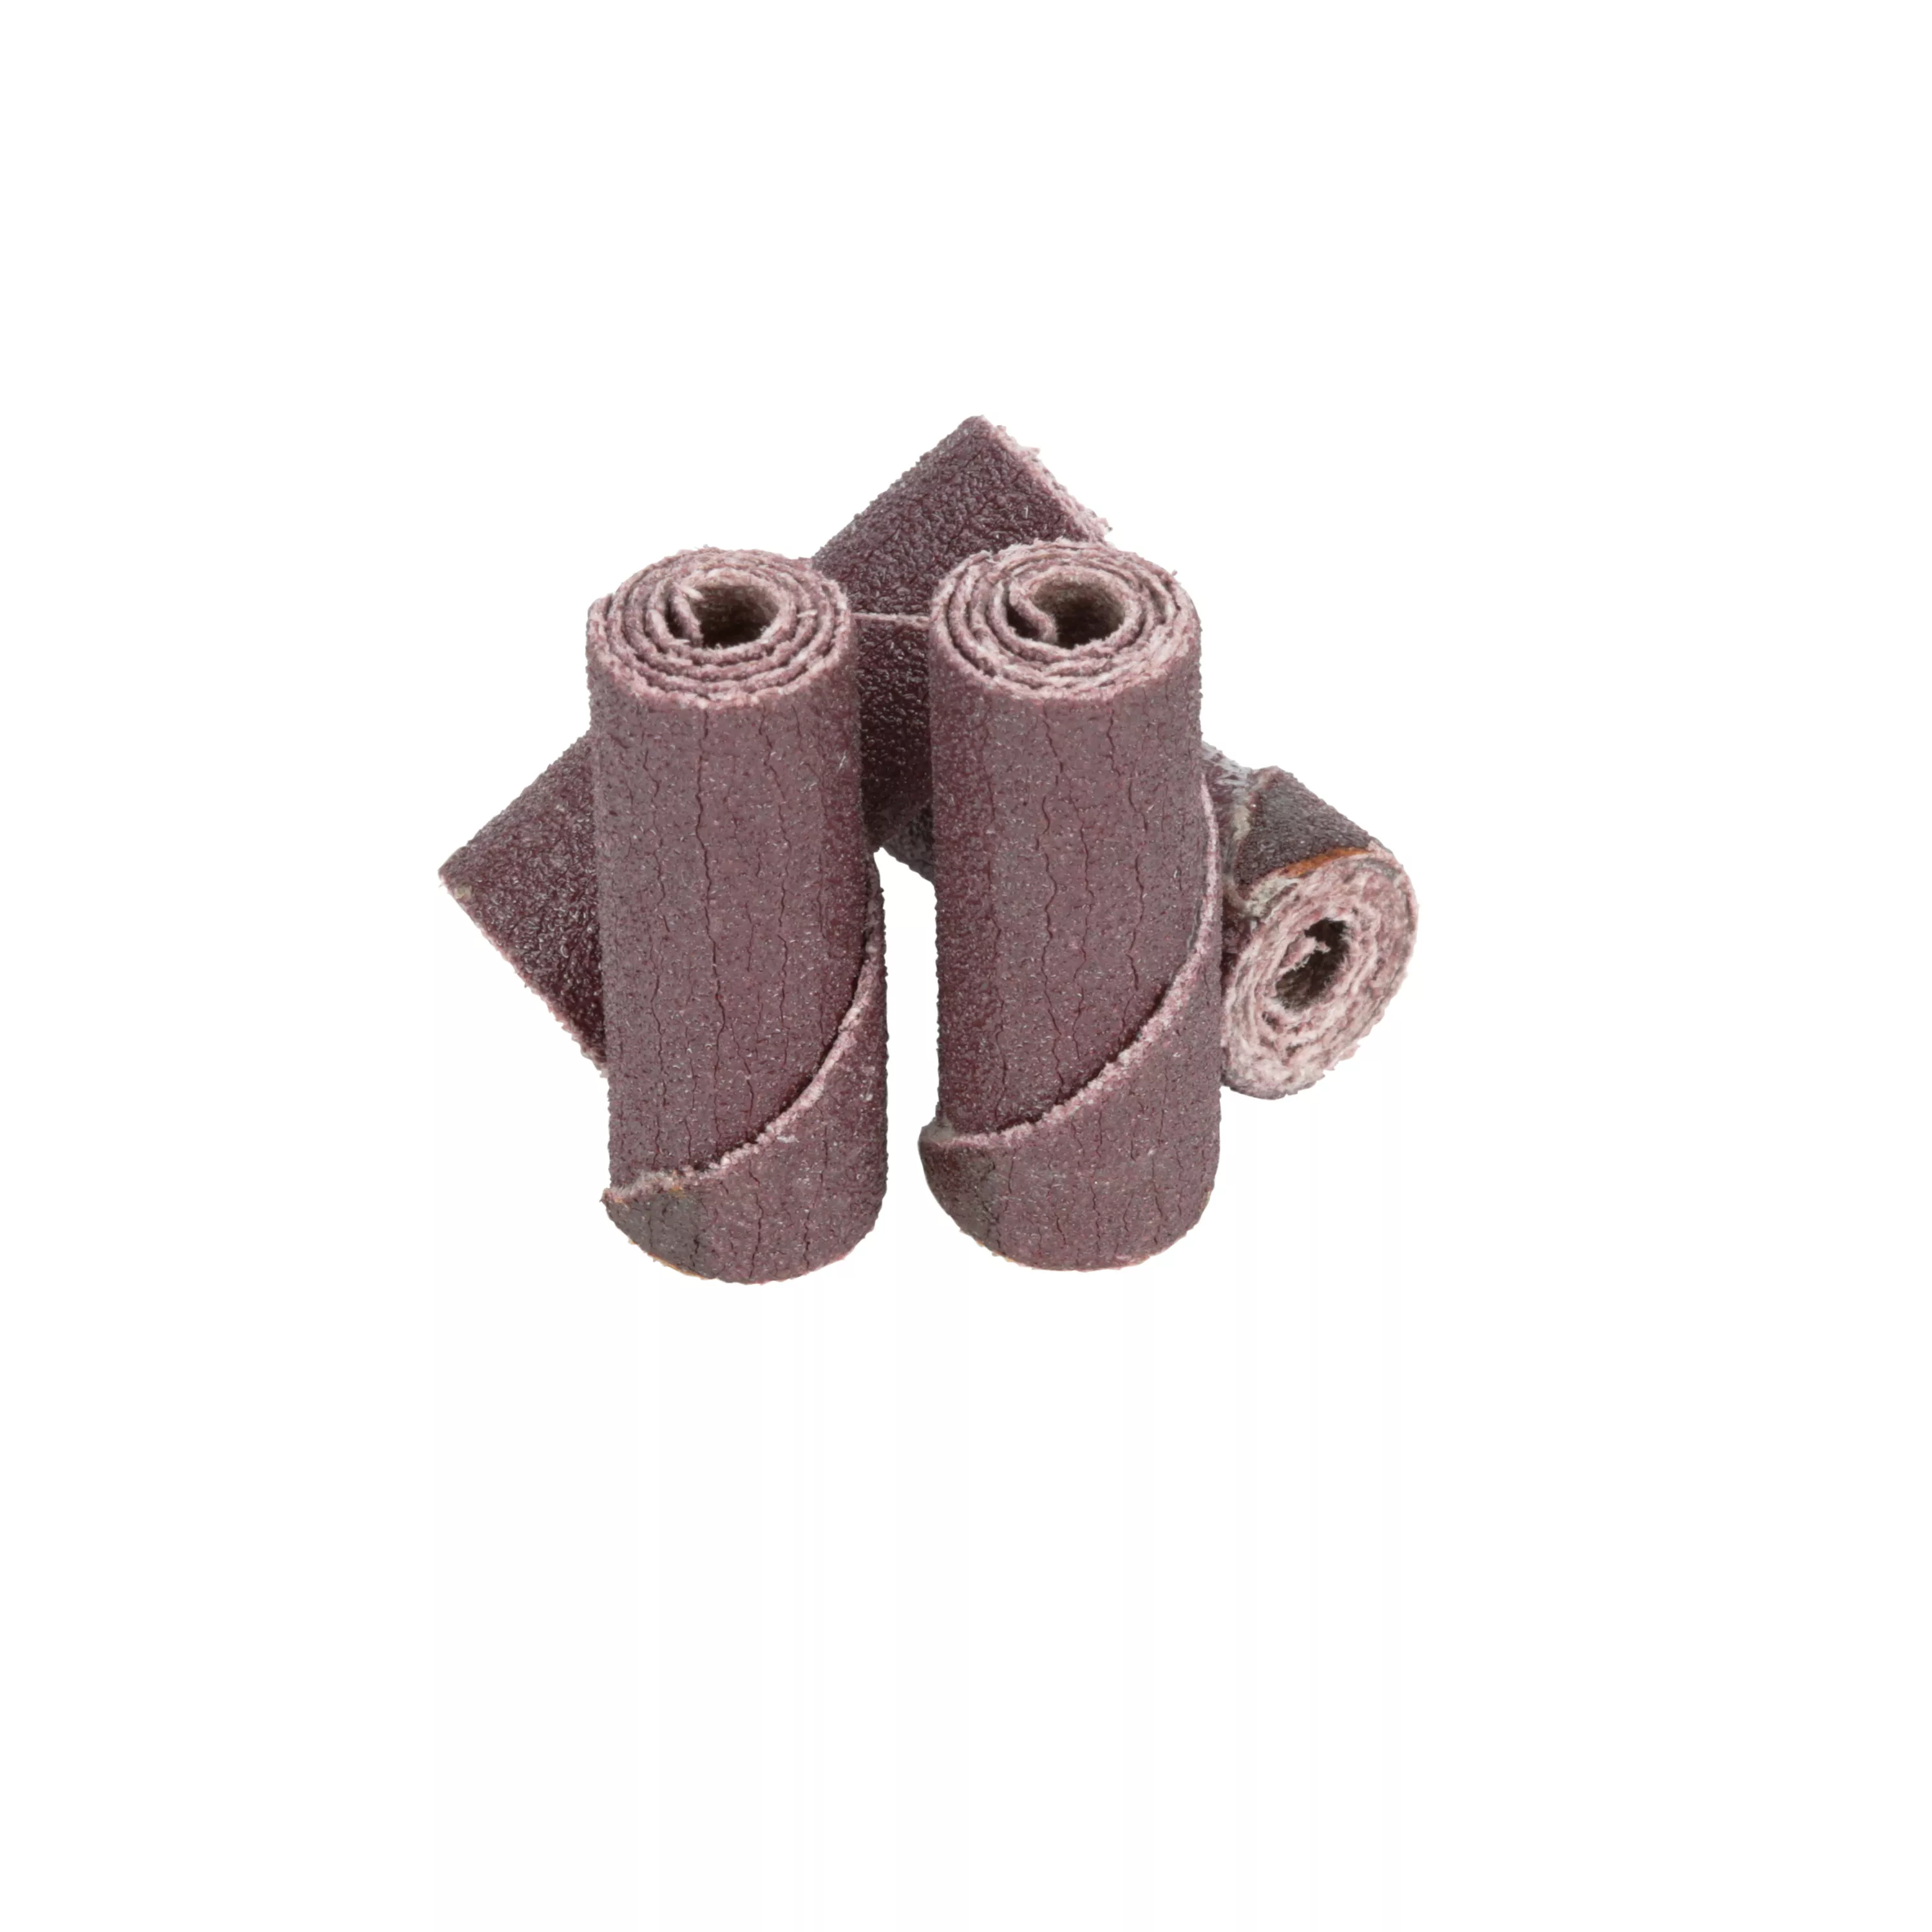 Product Number 341D | 3M™ Cartridge Roll 341D